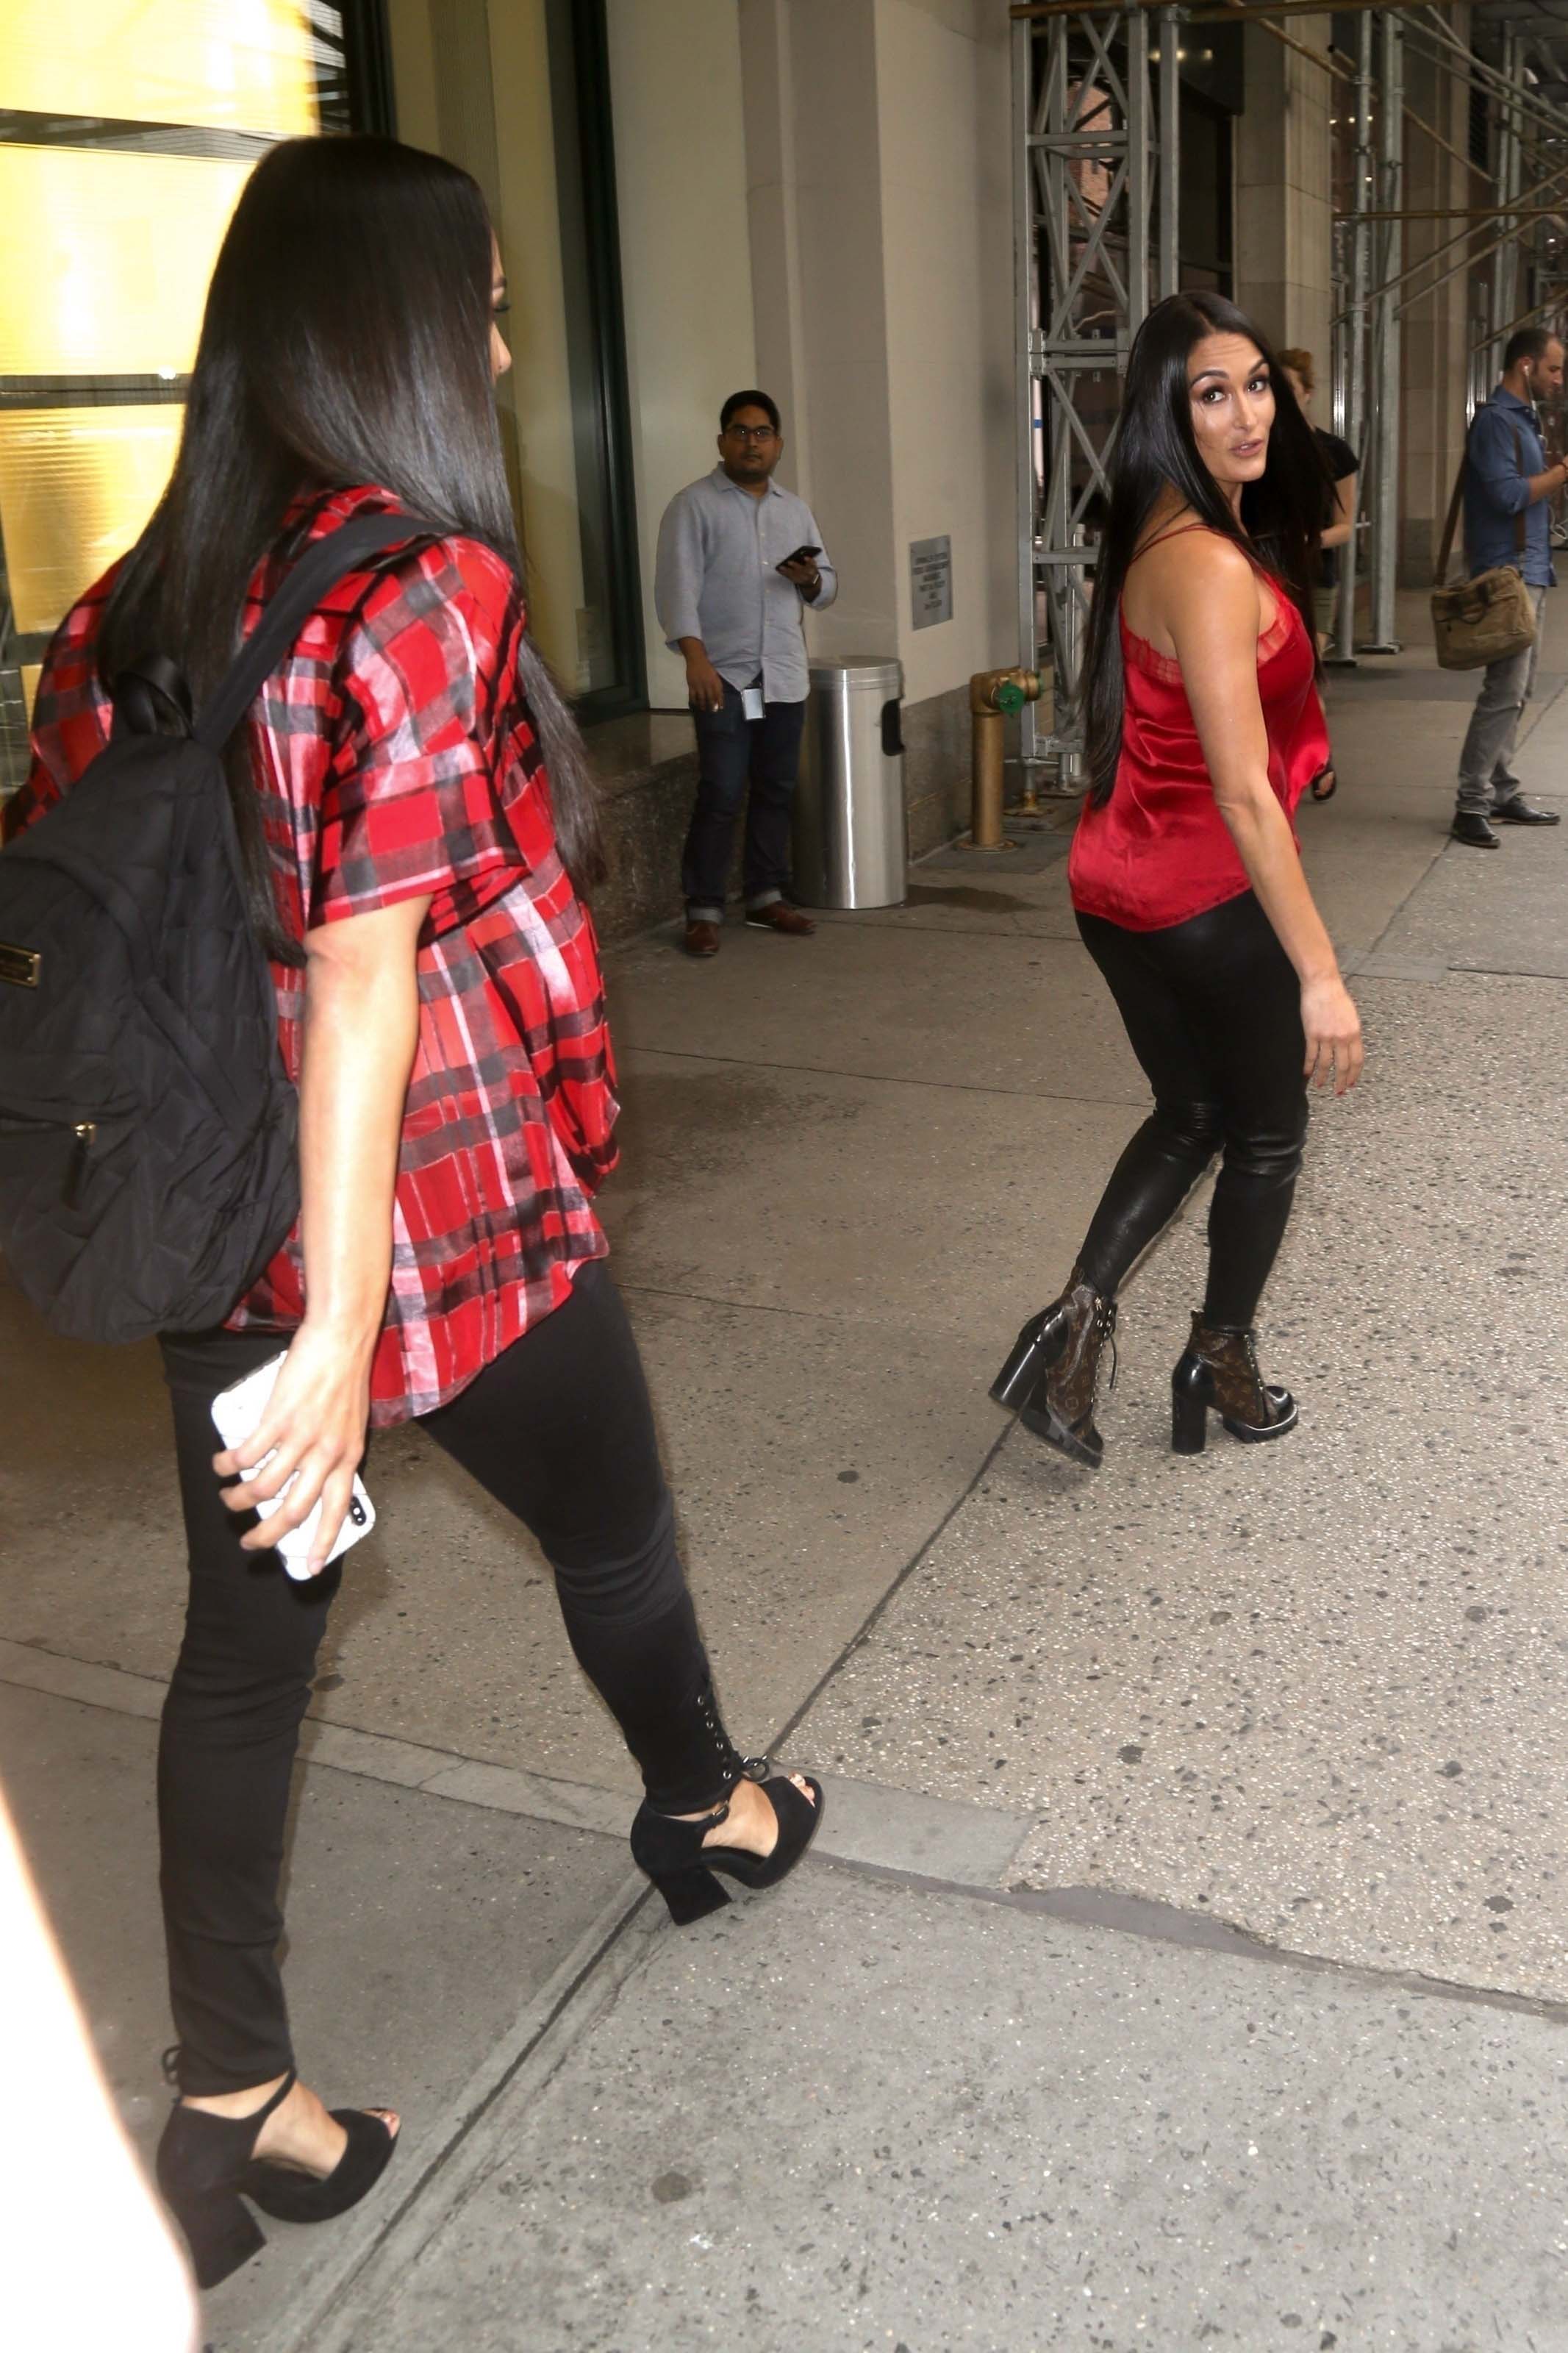 Nikki & Brie Bella are seen in NYC